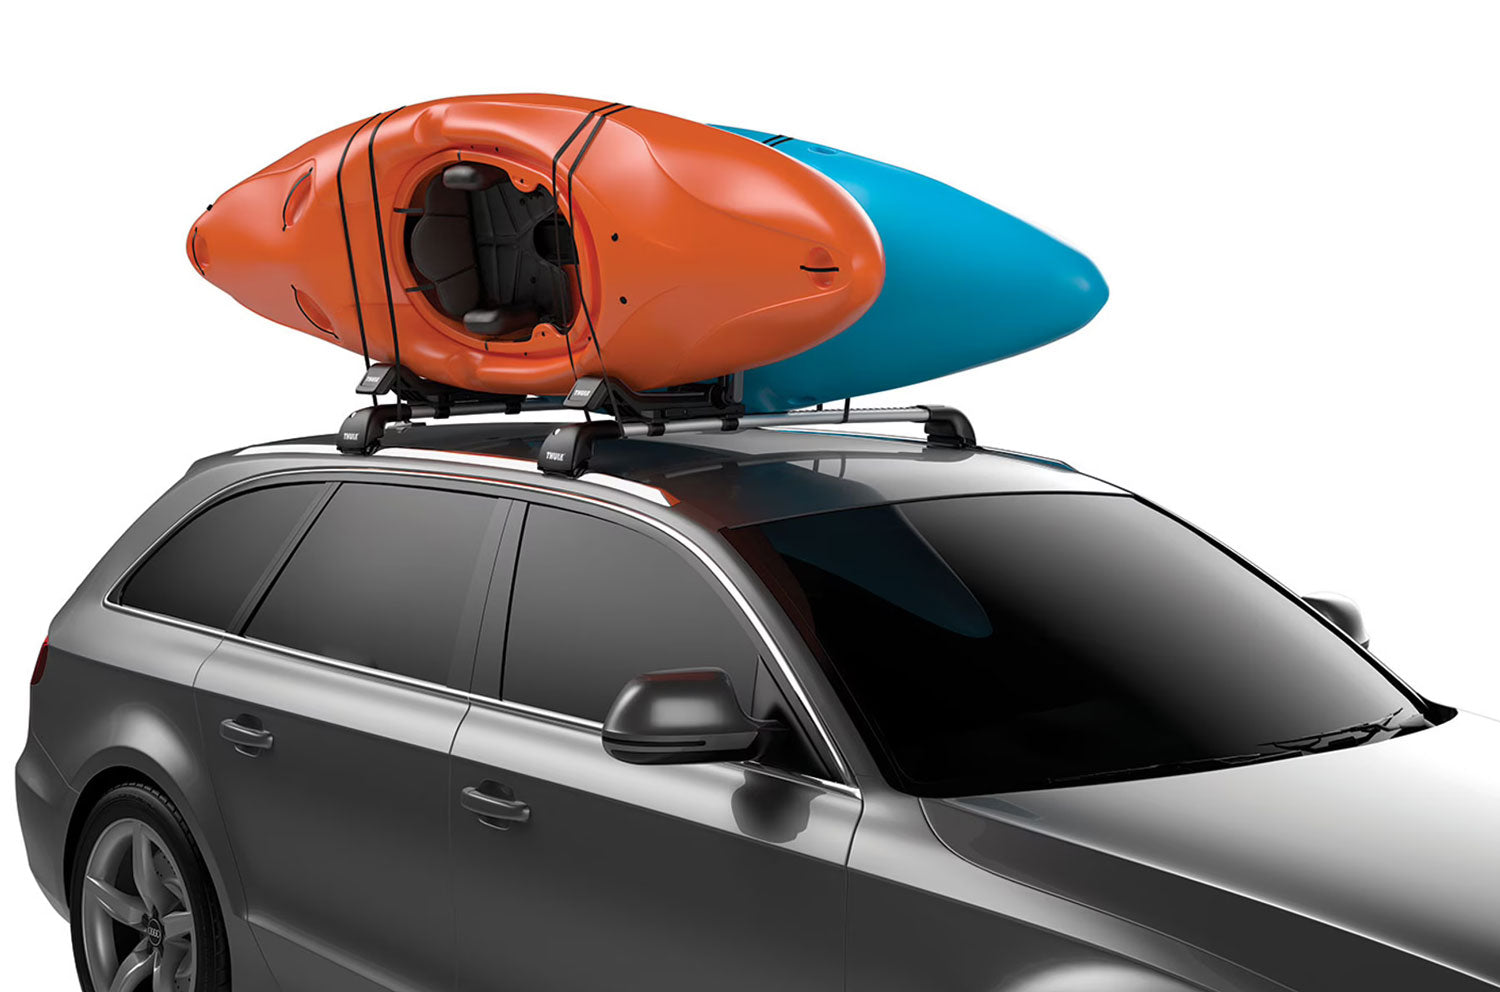 Thule Hull-a-Port XT 848 in upright position carrying two kayaks